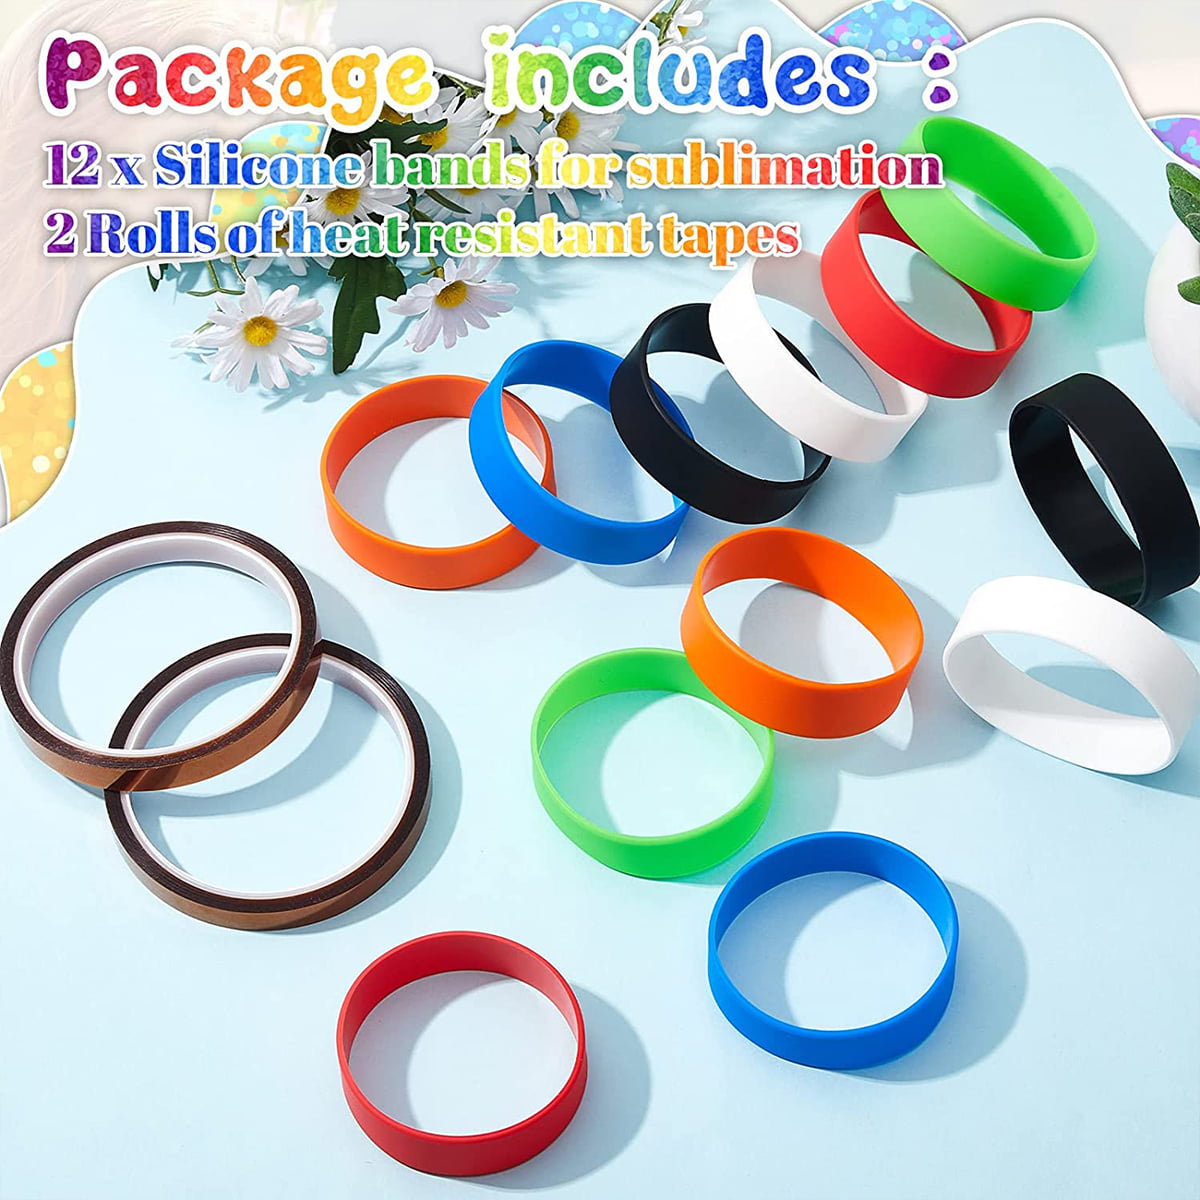 Dielianyi 7 Pcs Silicone Bands for Sublimation Tumbler Shrink Wrap Heat-Resistant Rubber Bands Paper Holder Ring Elastic Bands for Prevent Ghosting